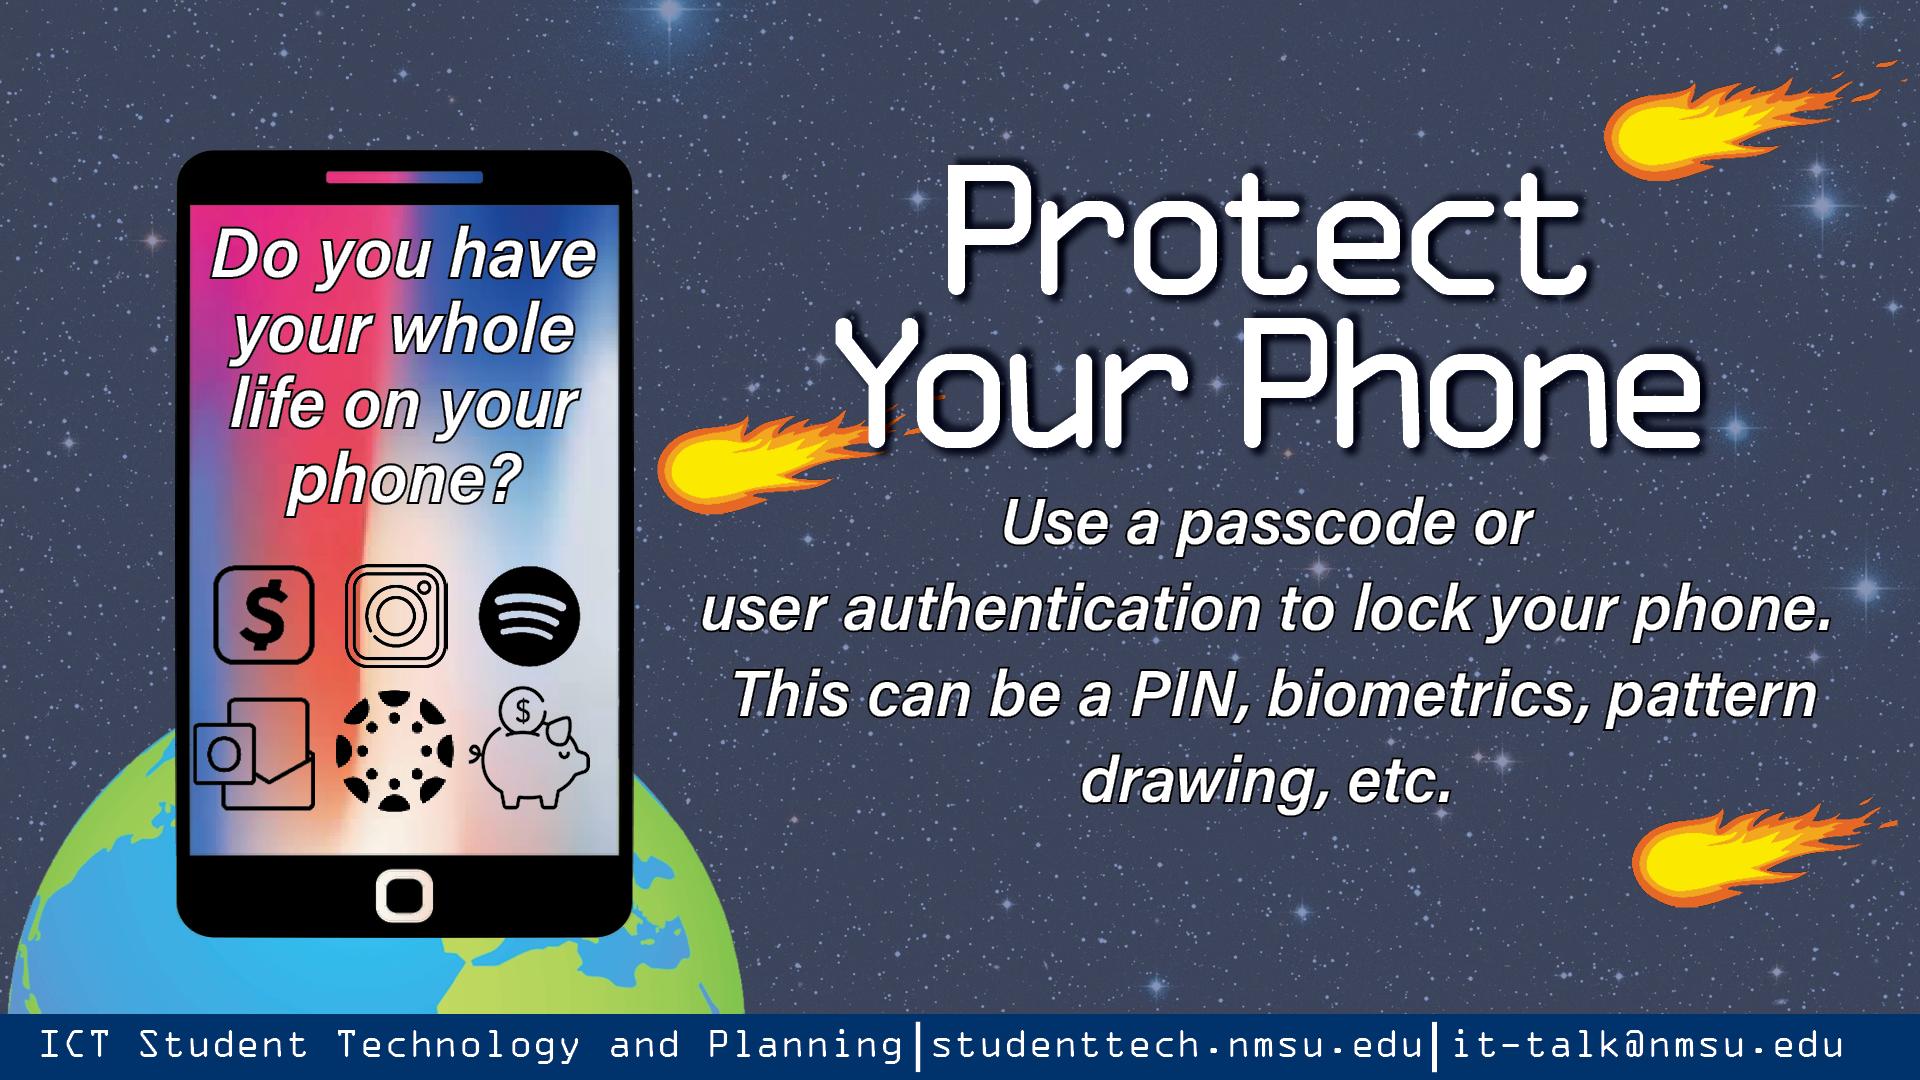 Protect your phone. Use a passcode or user authentication to lock your phone. This can be a PIN, biometrics, pattern drawing, etc.